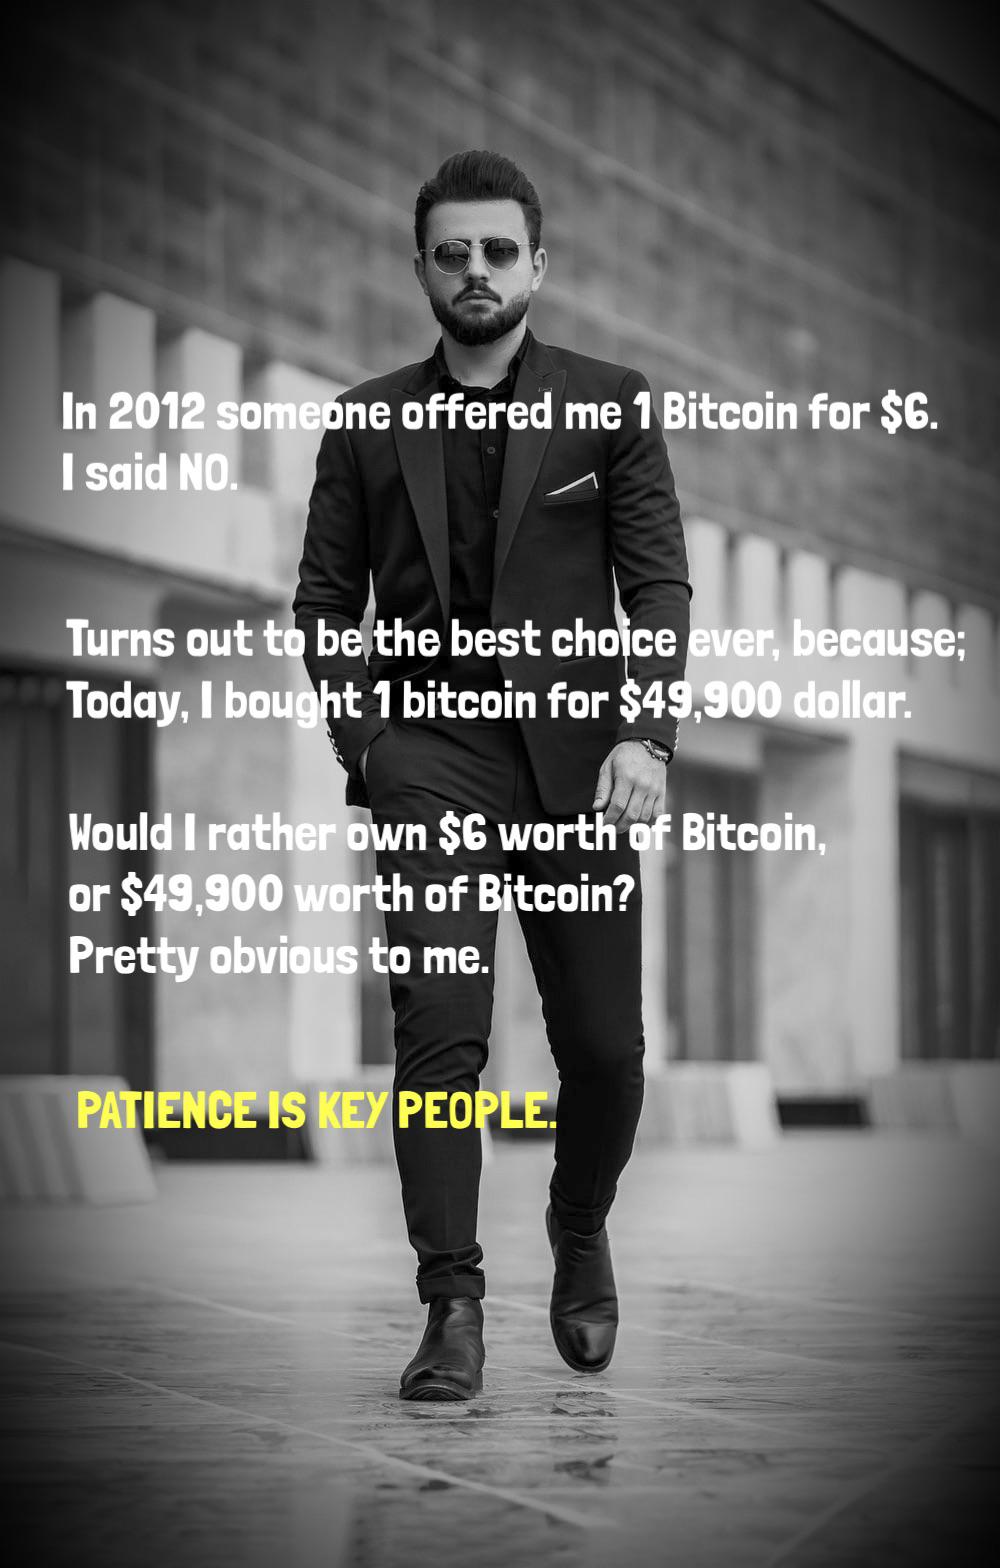 photograph - In 2012 someone offered me 1 Bitcoin for $6. I said No. Turns out to be the best choice ever, because; Today, I bought 1 bitcoin for $49,900 dollar. Would I rather own $6 worth of Bitcoin, or $49,900 worth of Bitcoin? Pretty obvious to me. Pa